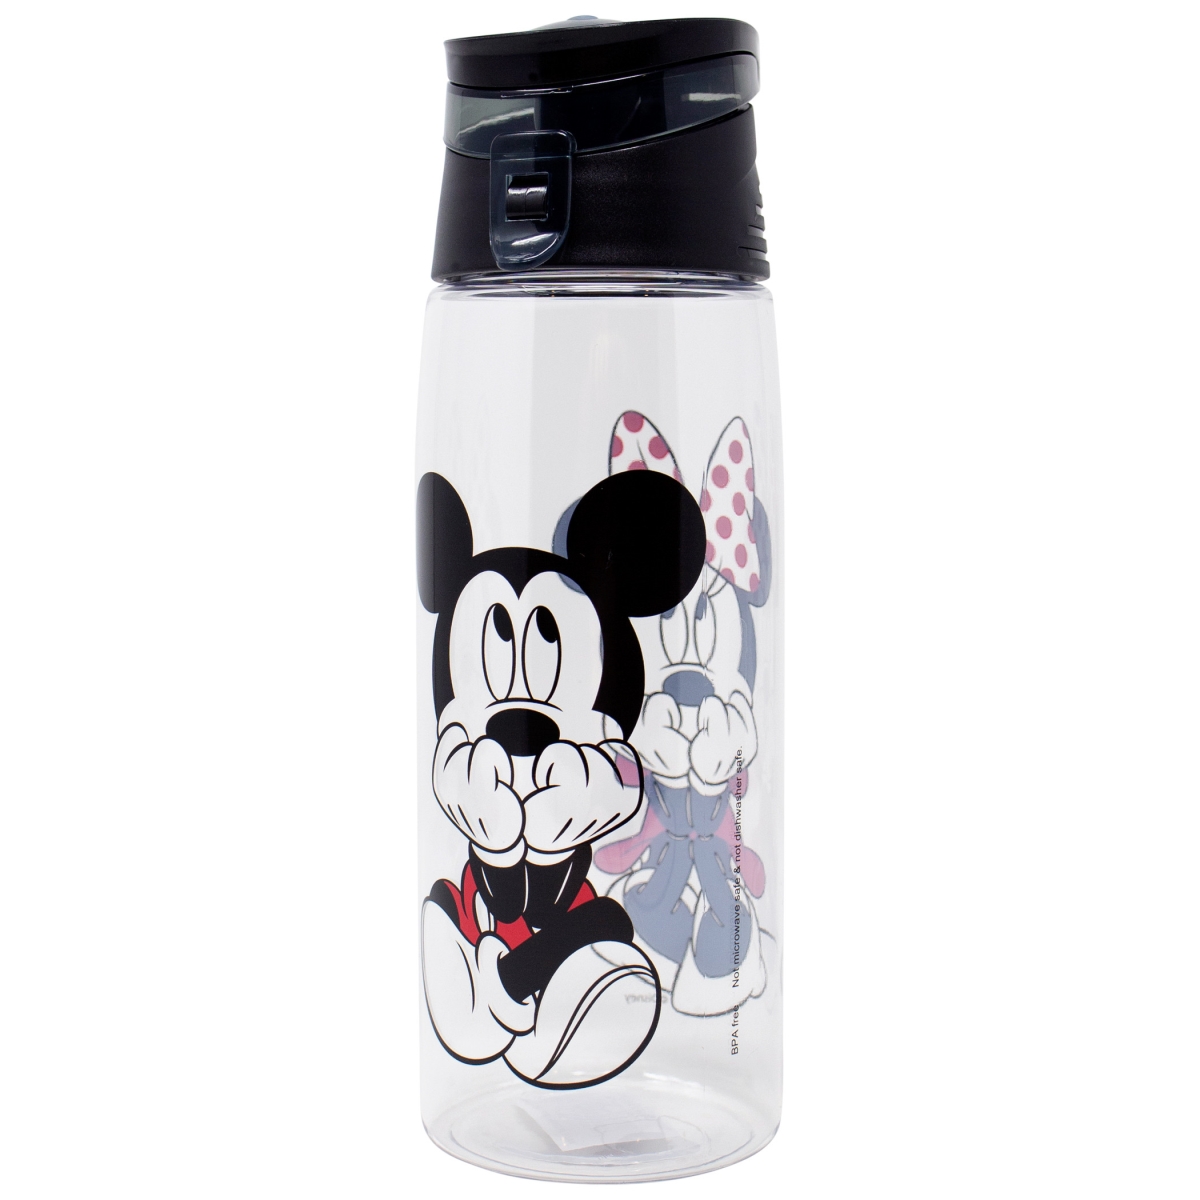 Picture of Disney 802355 Disney Mickey & Minnie Mouse Flip Top Water Bottle